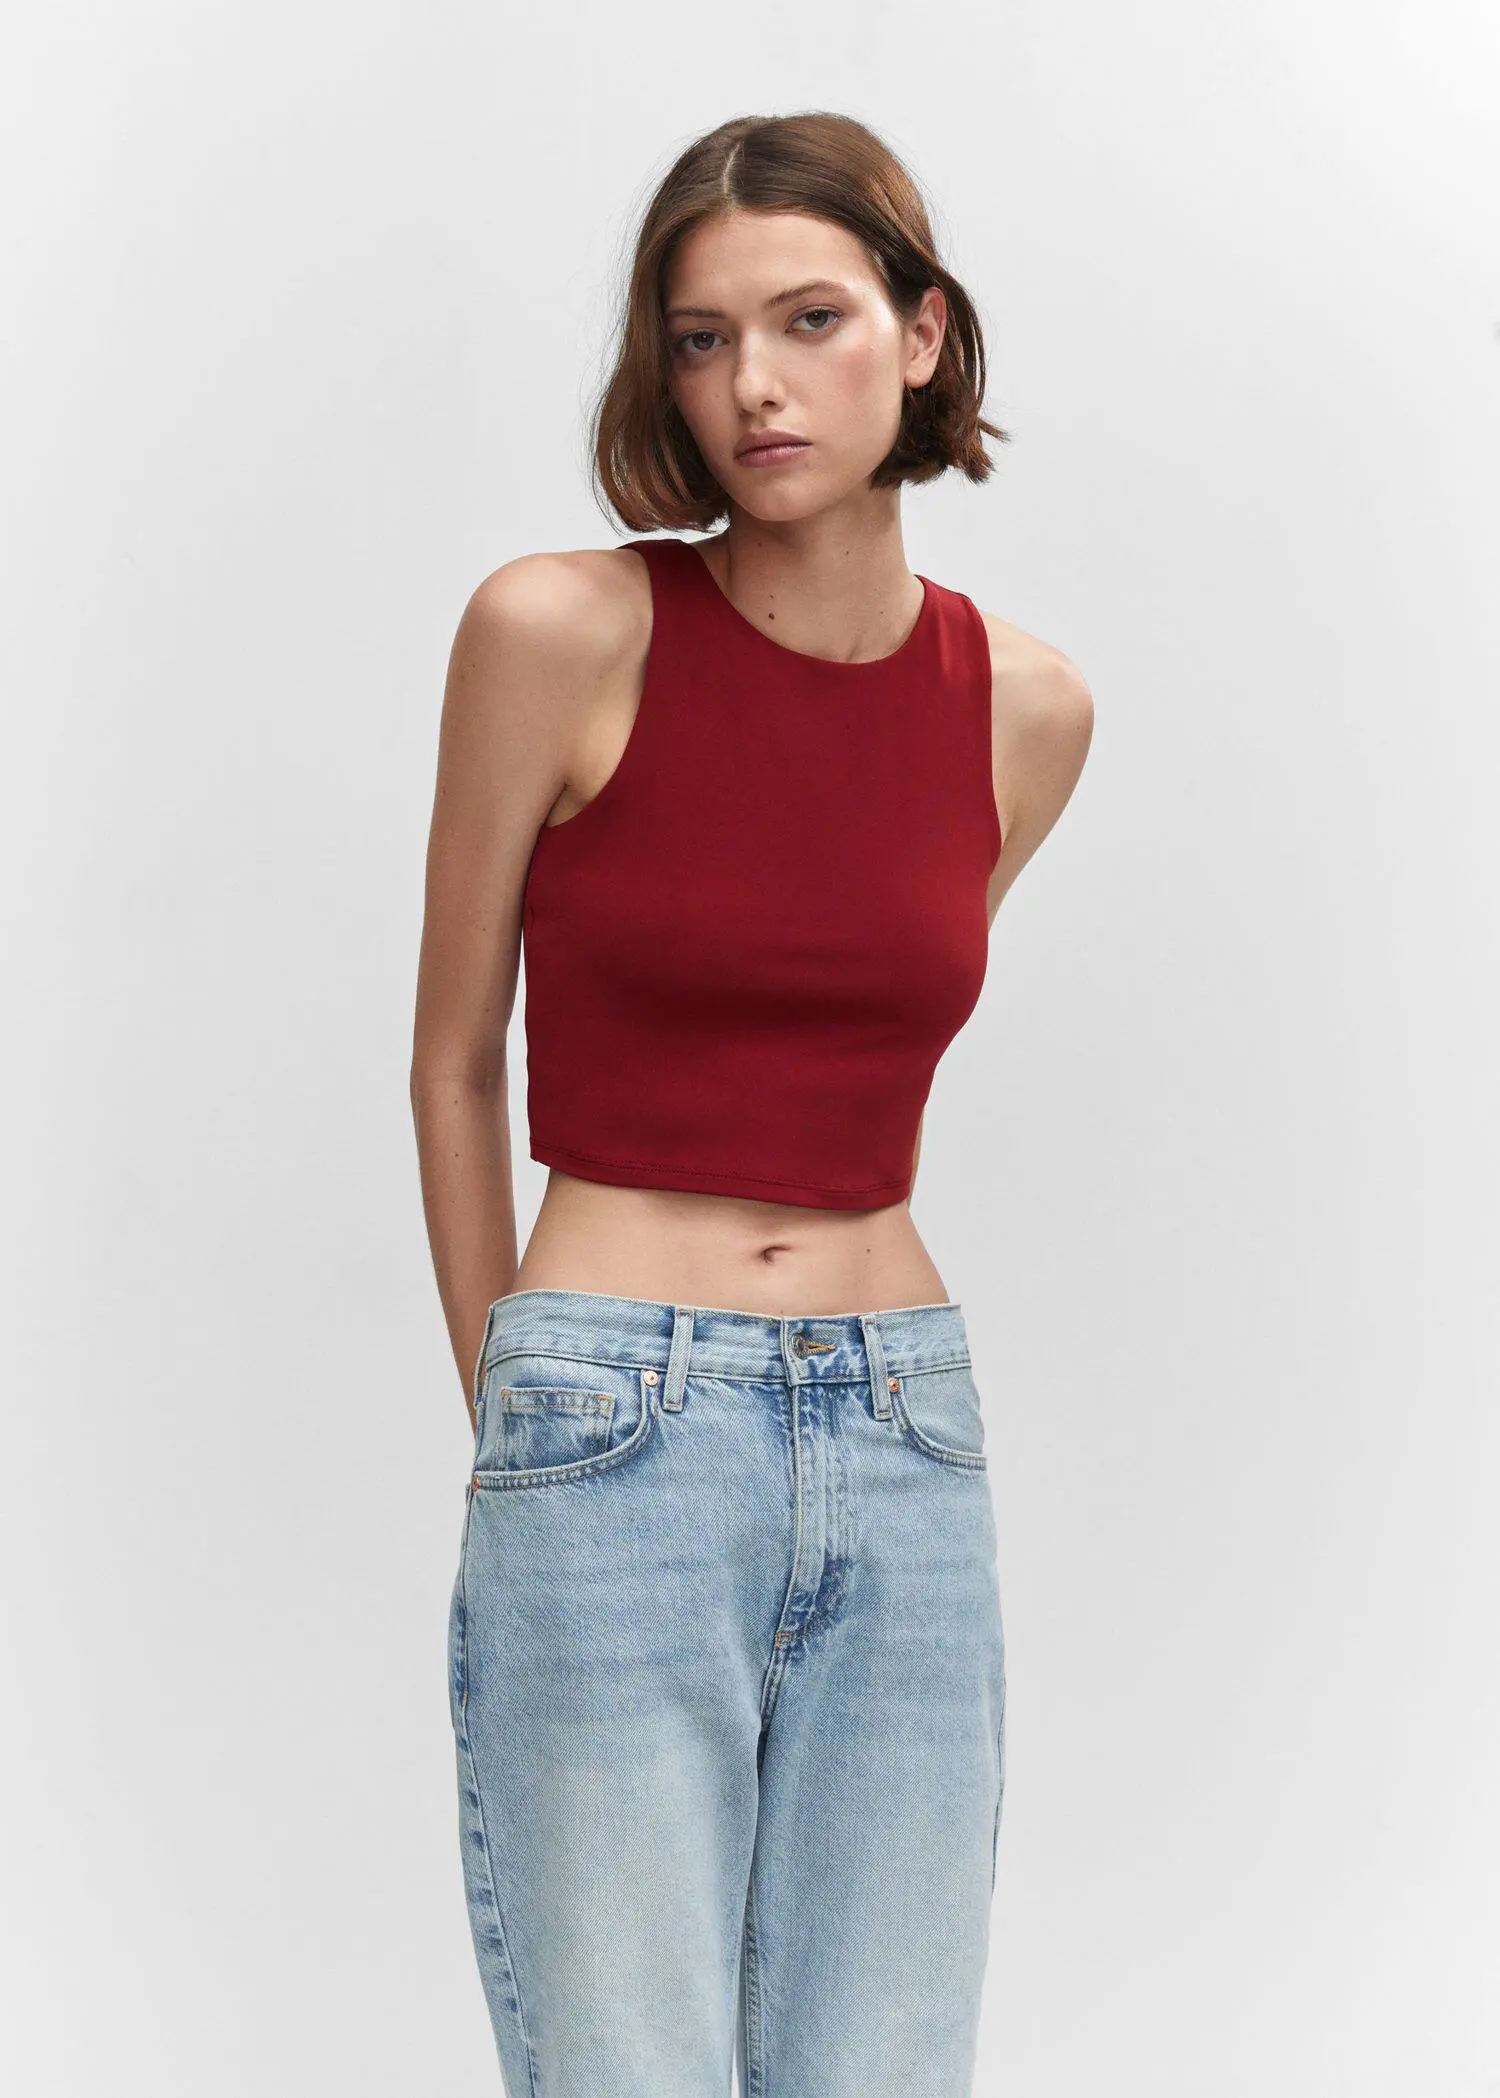 Mango Crop top halter neck. a woman wearing a red top and jeans. 